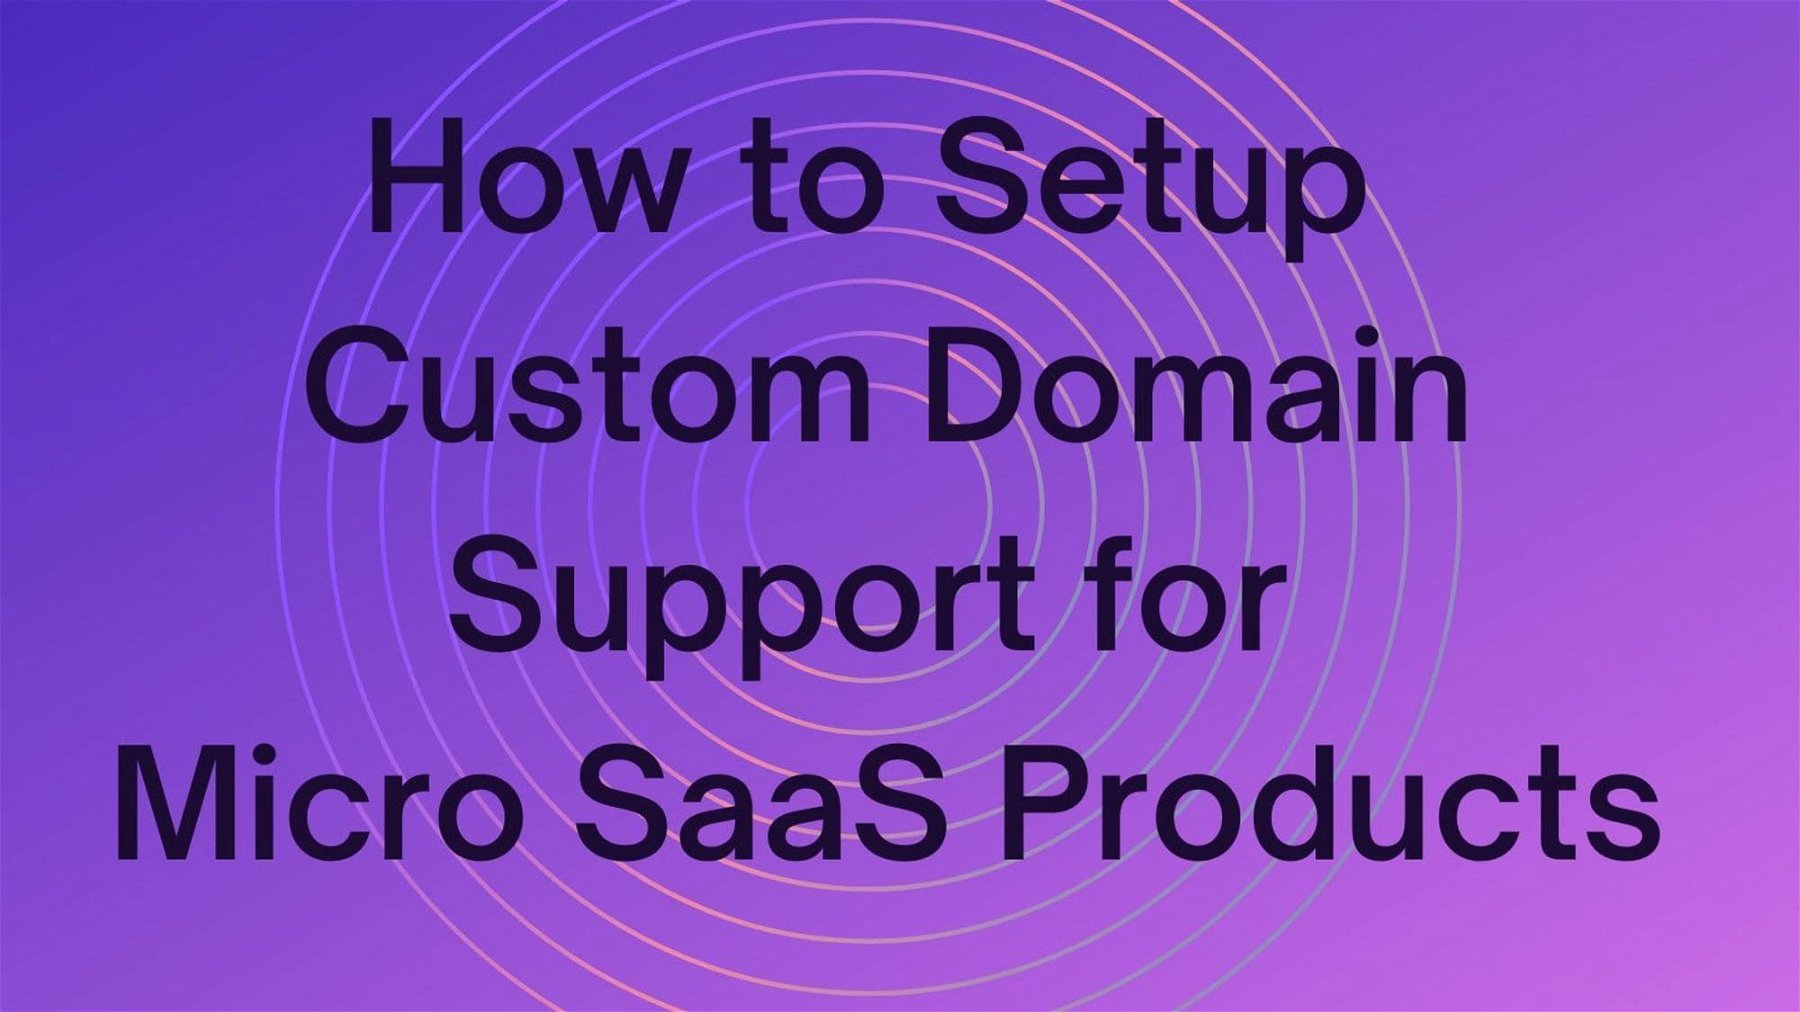 How to Setup Custom Domain Support for Micro SaaS Products